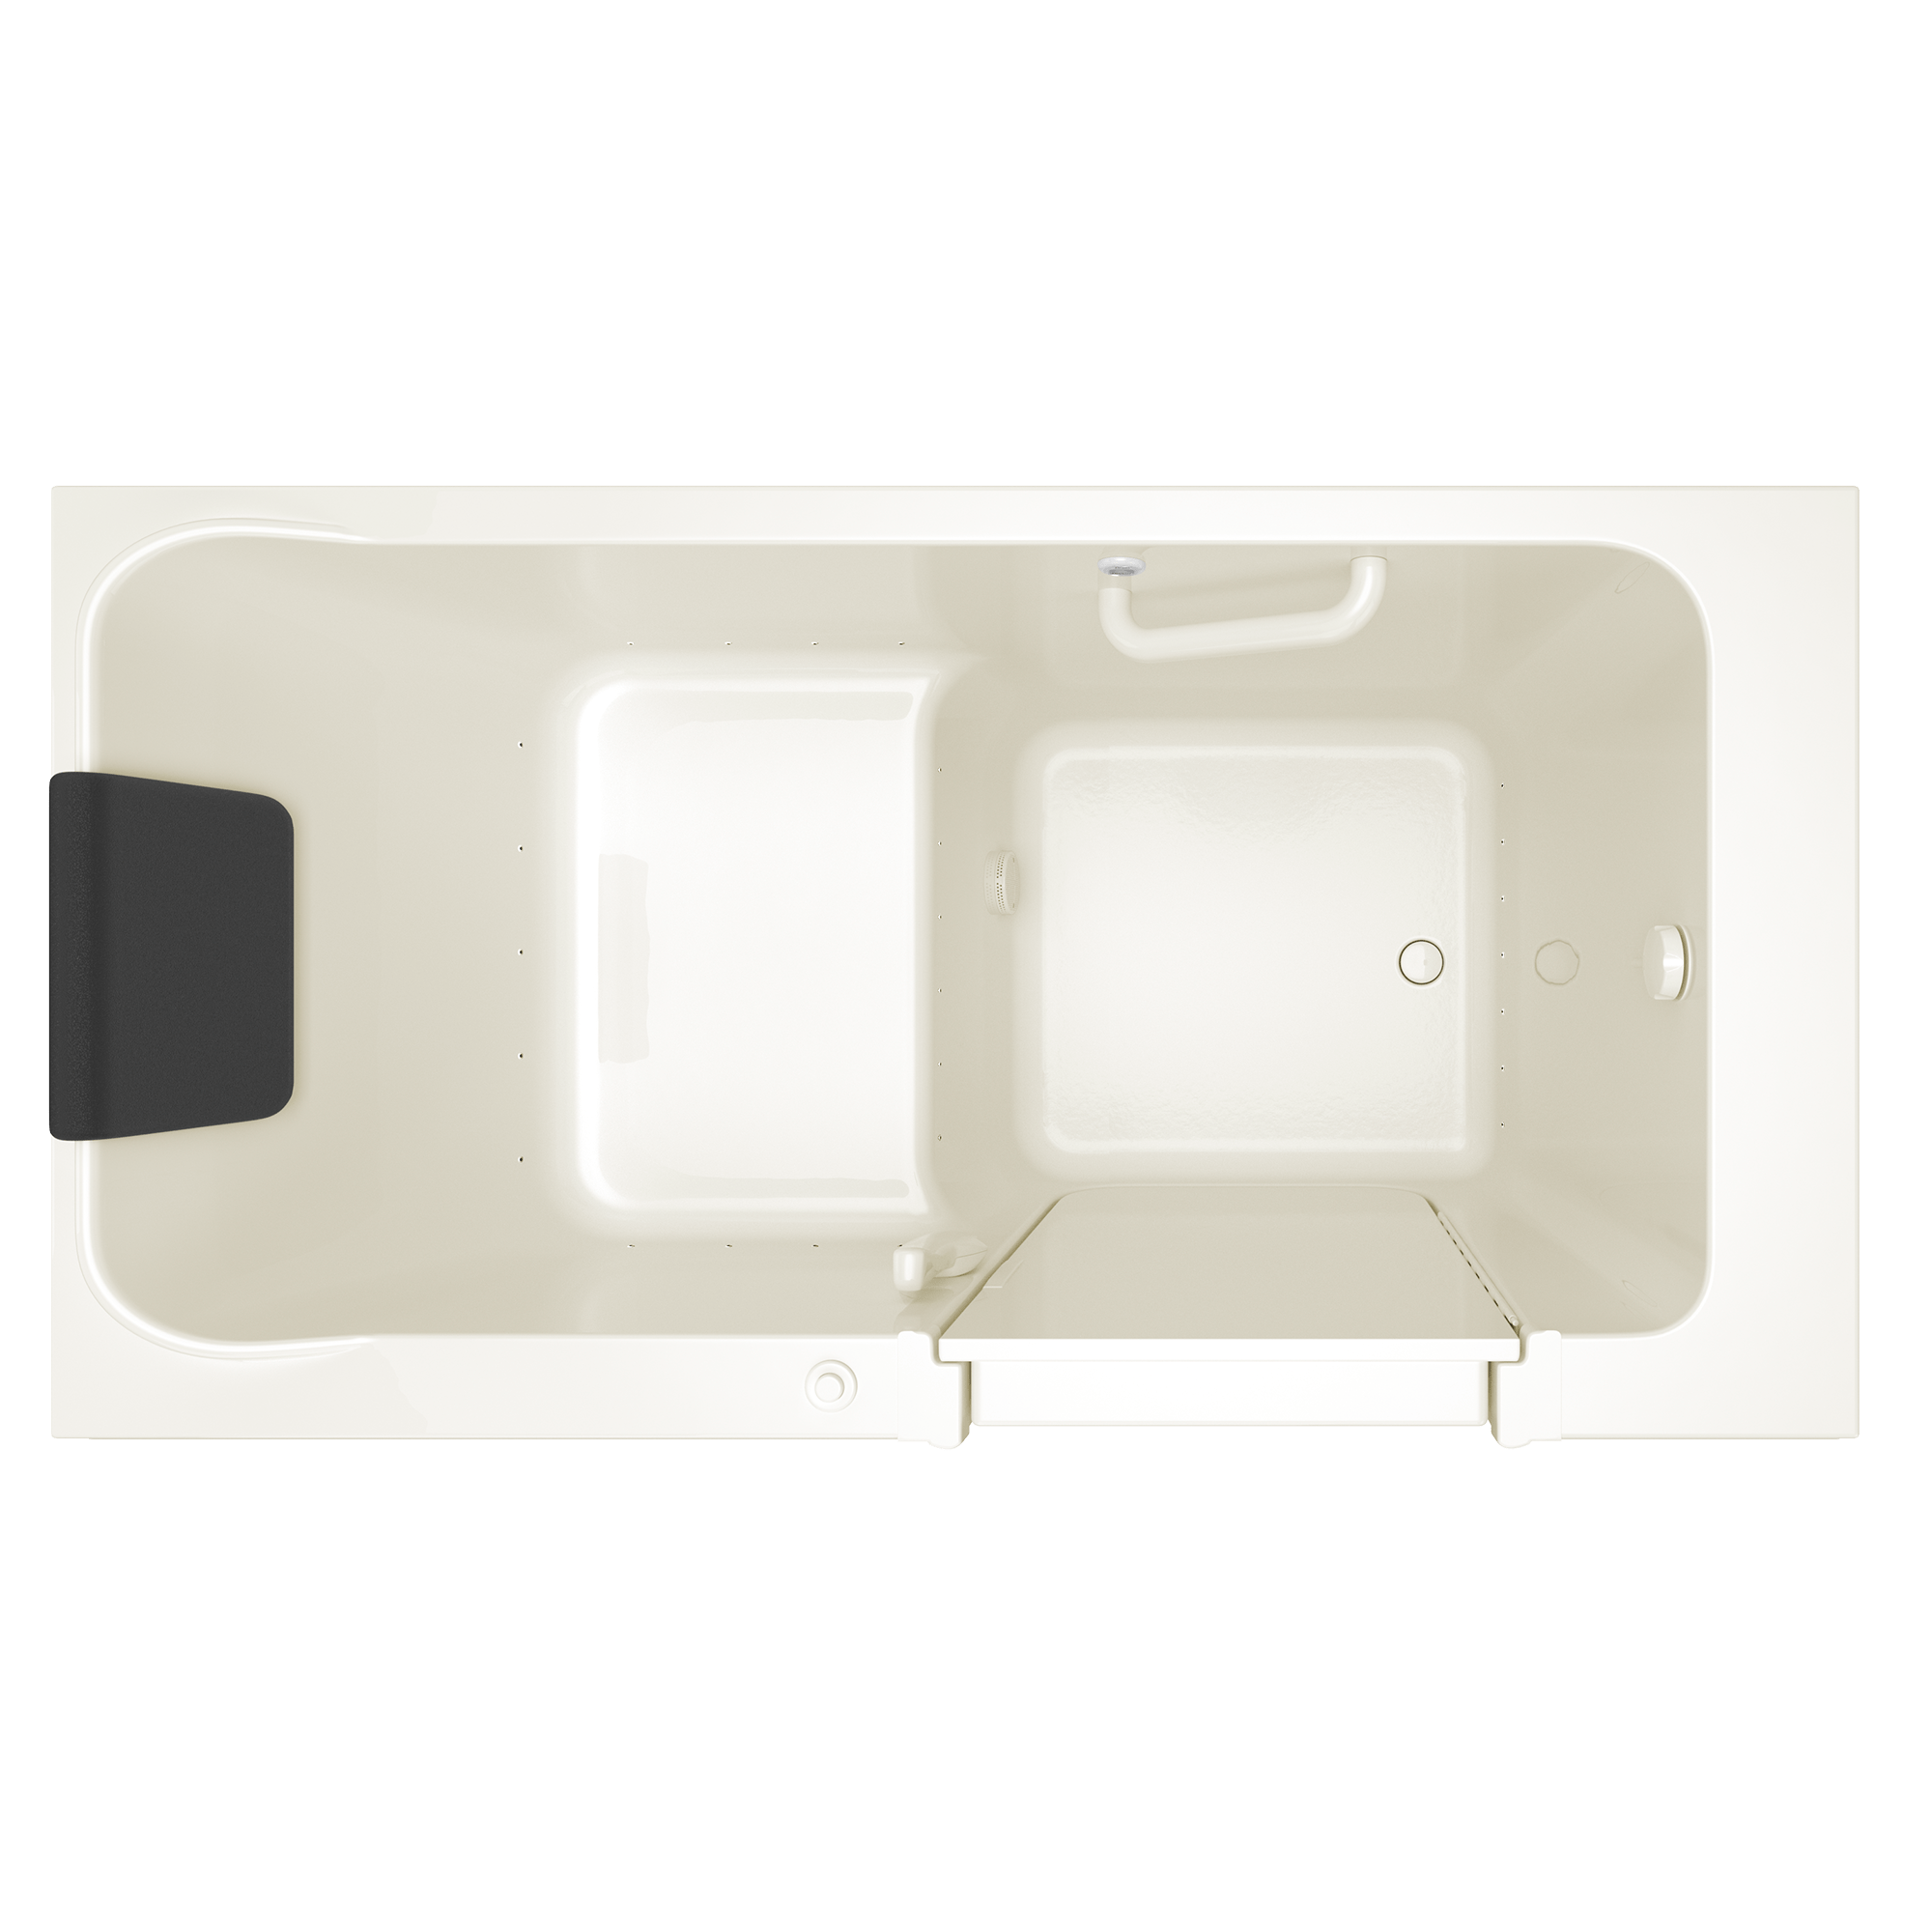 Acrylic Luxury Series 32 x 60 -Inch Walk-in Tub With Air Spa System - Right-Hand Drain